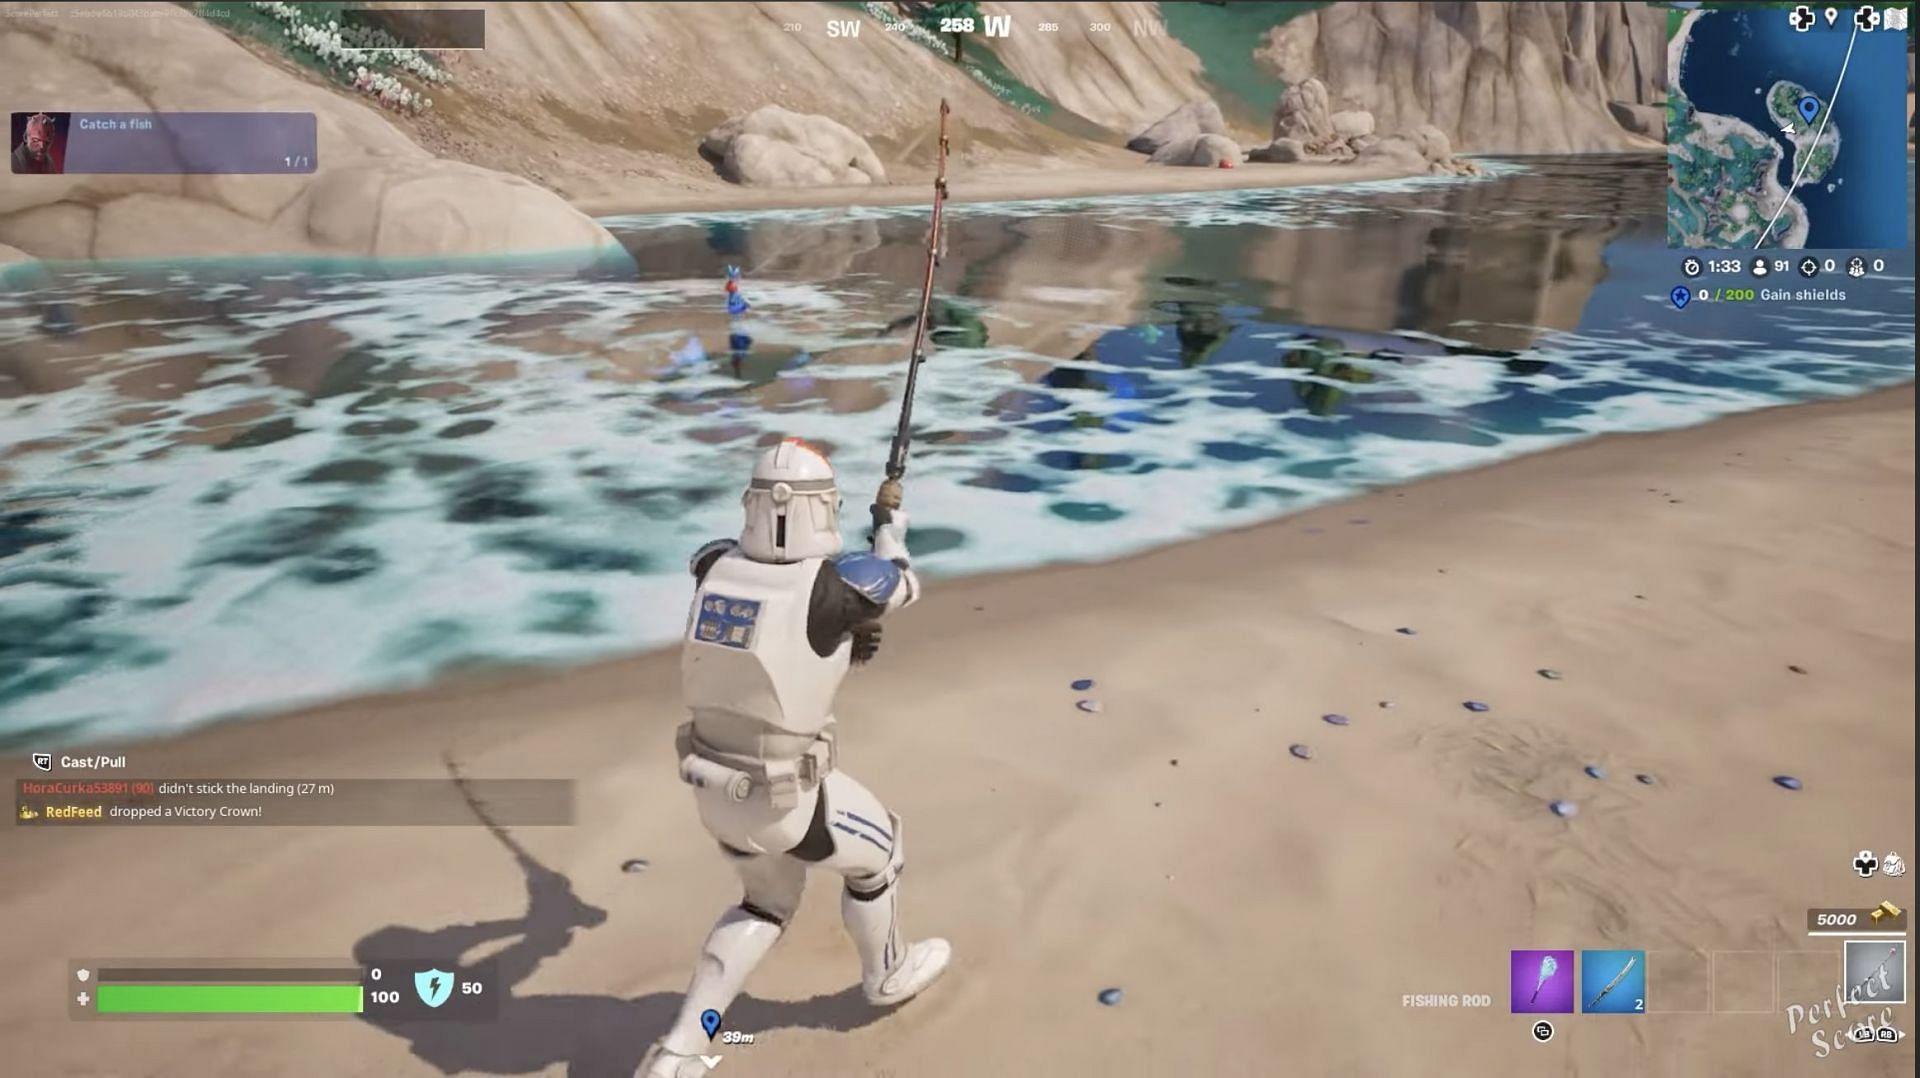 Catch a fish in Fortnite (Image via Perfect Score on YouTube)